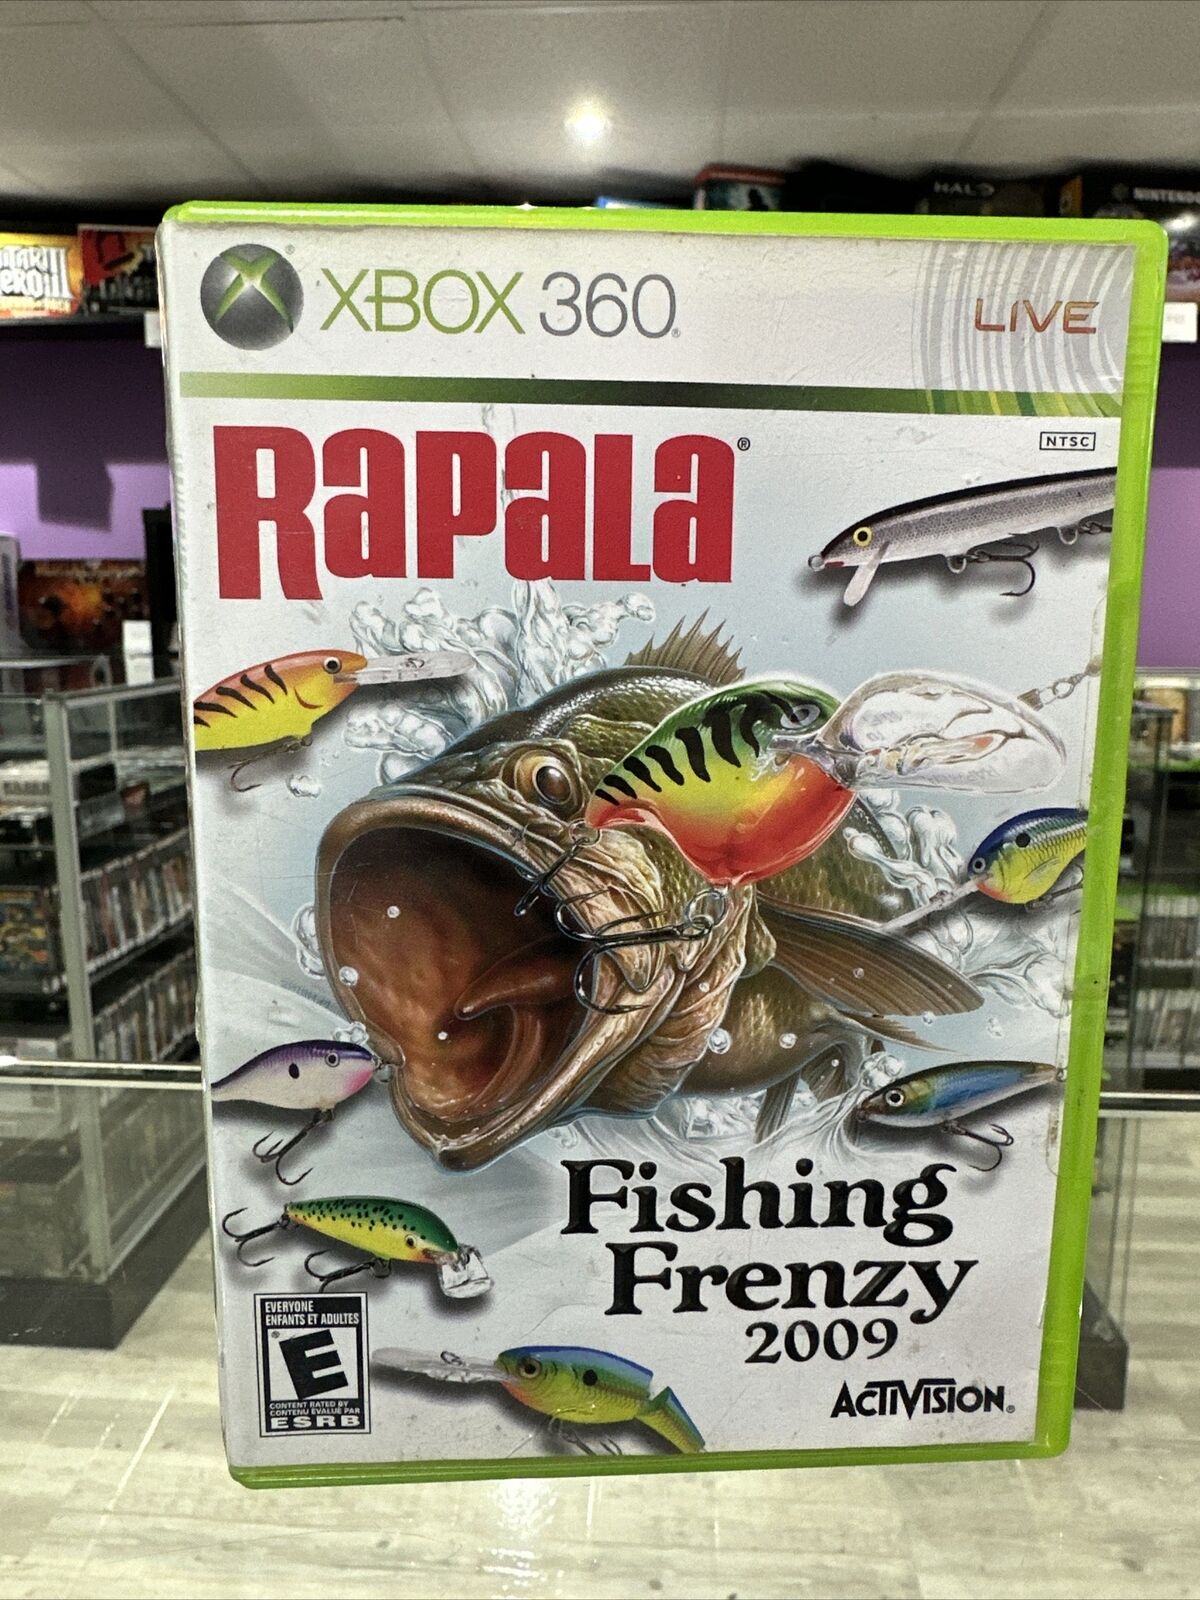 Rapala: Fishing Frenzy 2009 (Microsoft Xbox 360, 2008) Complete Tested